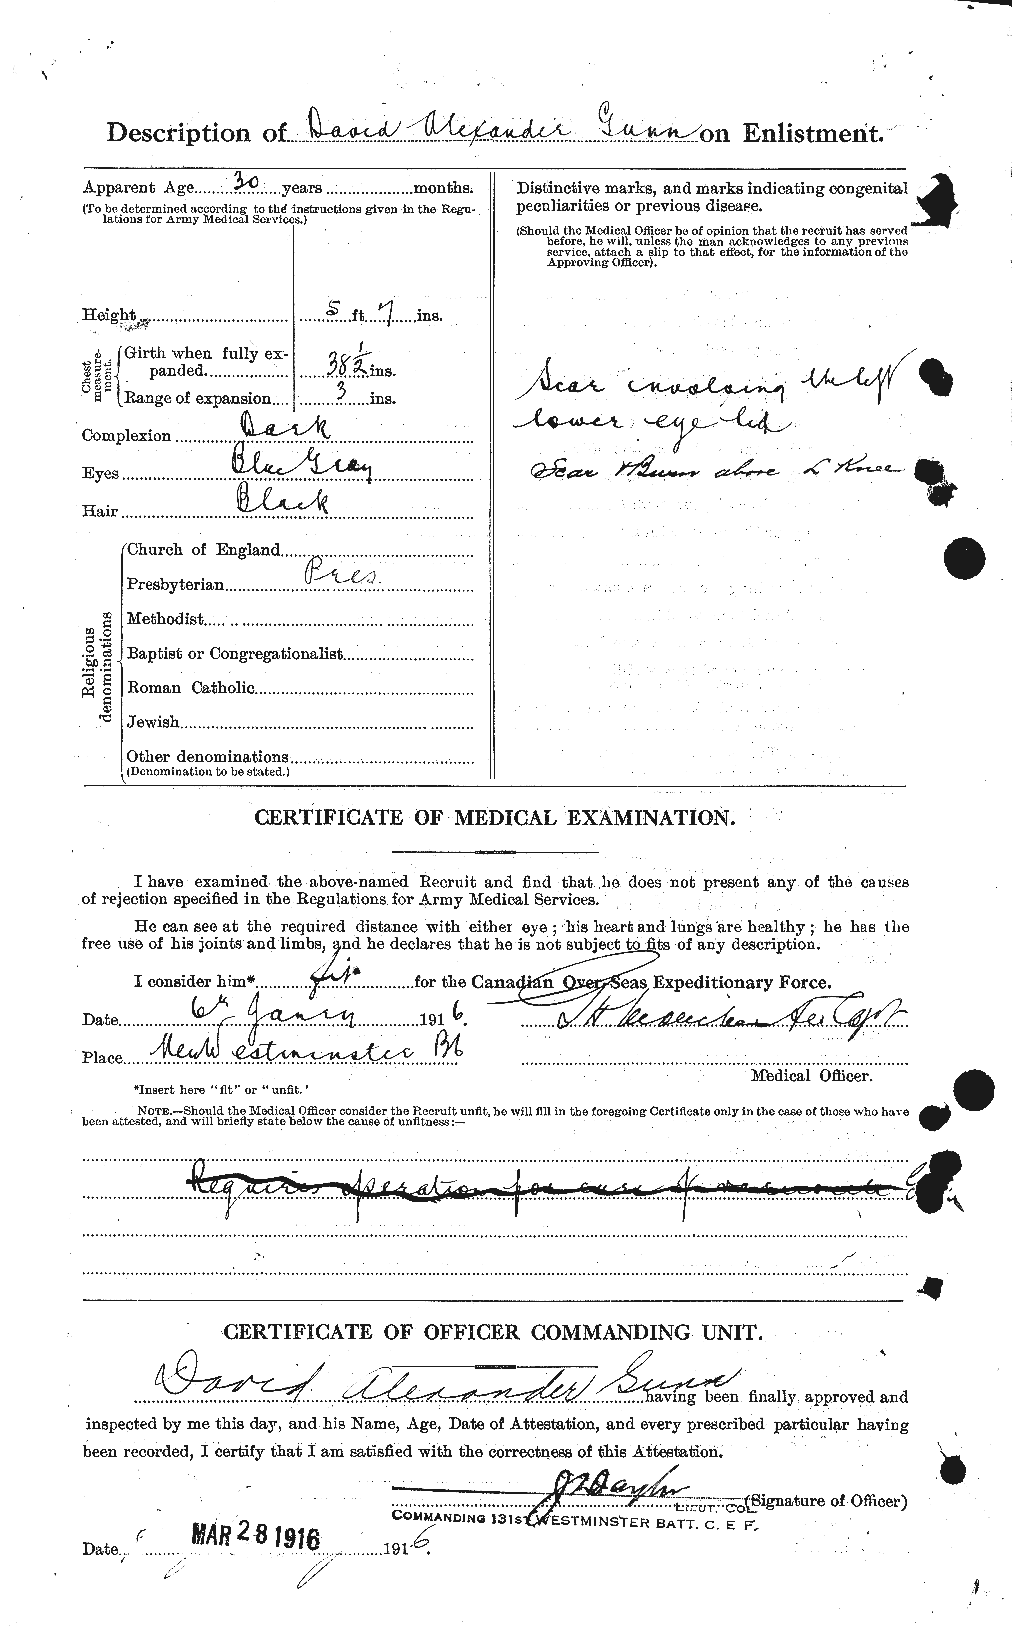 Personnel Records of the First World War - CEF 368024b